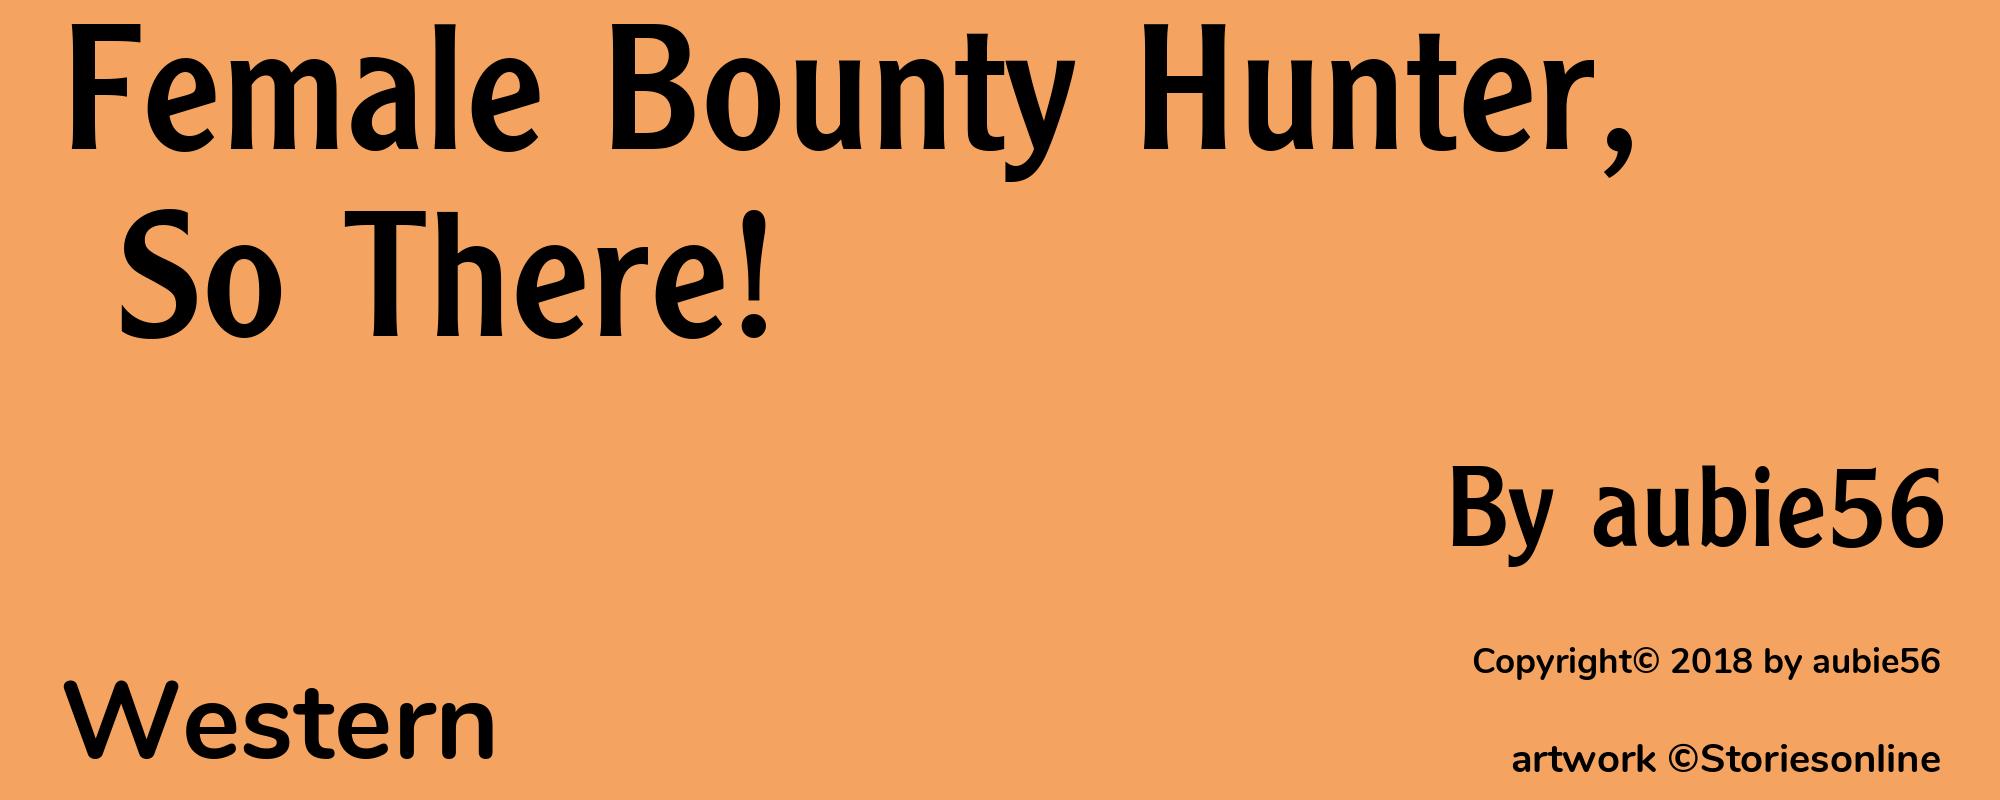 Female Bounty Hunter, So There! - Cover